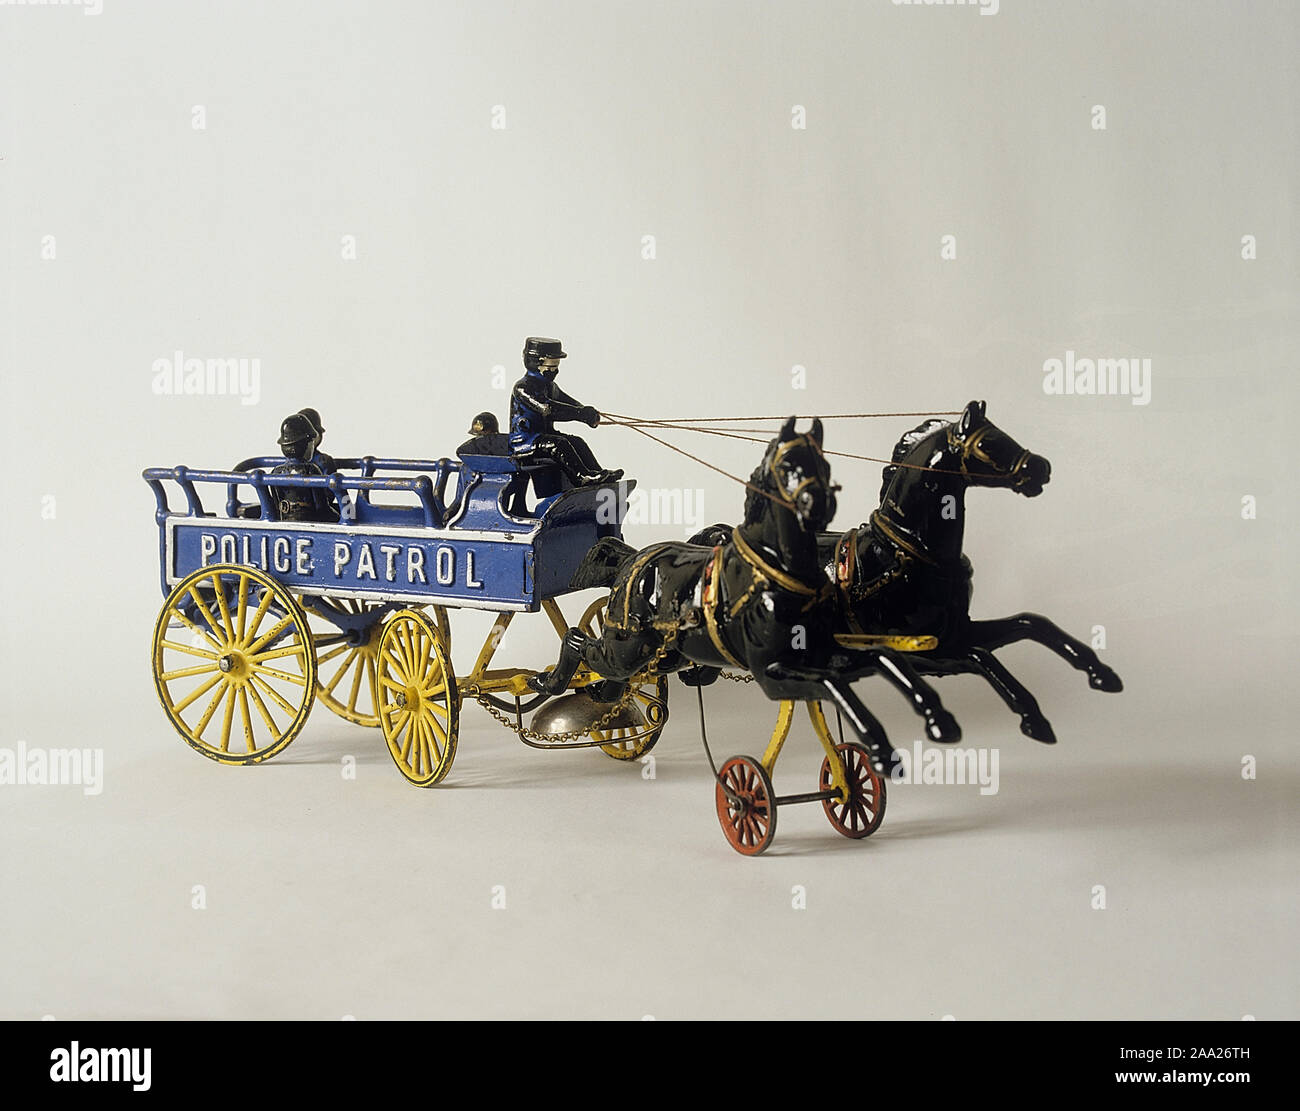 Childrens toys from the past. A cast iron toy made in USA with two horses pulling a police patrol wagon. Simple but fun toys that were cheap to buy. They are now collectible and can be very valuable. Stock Photo